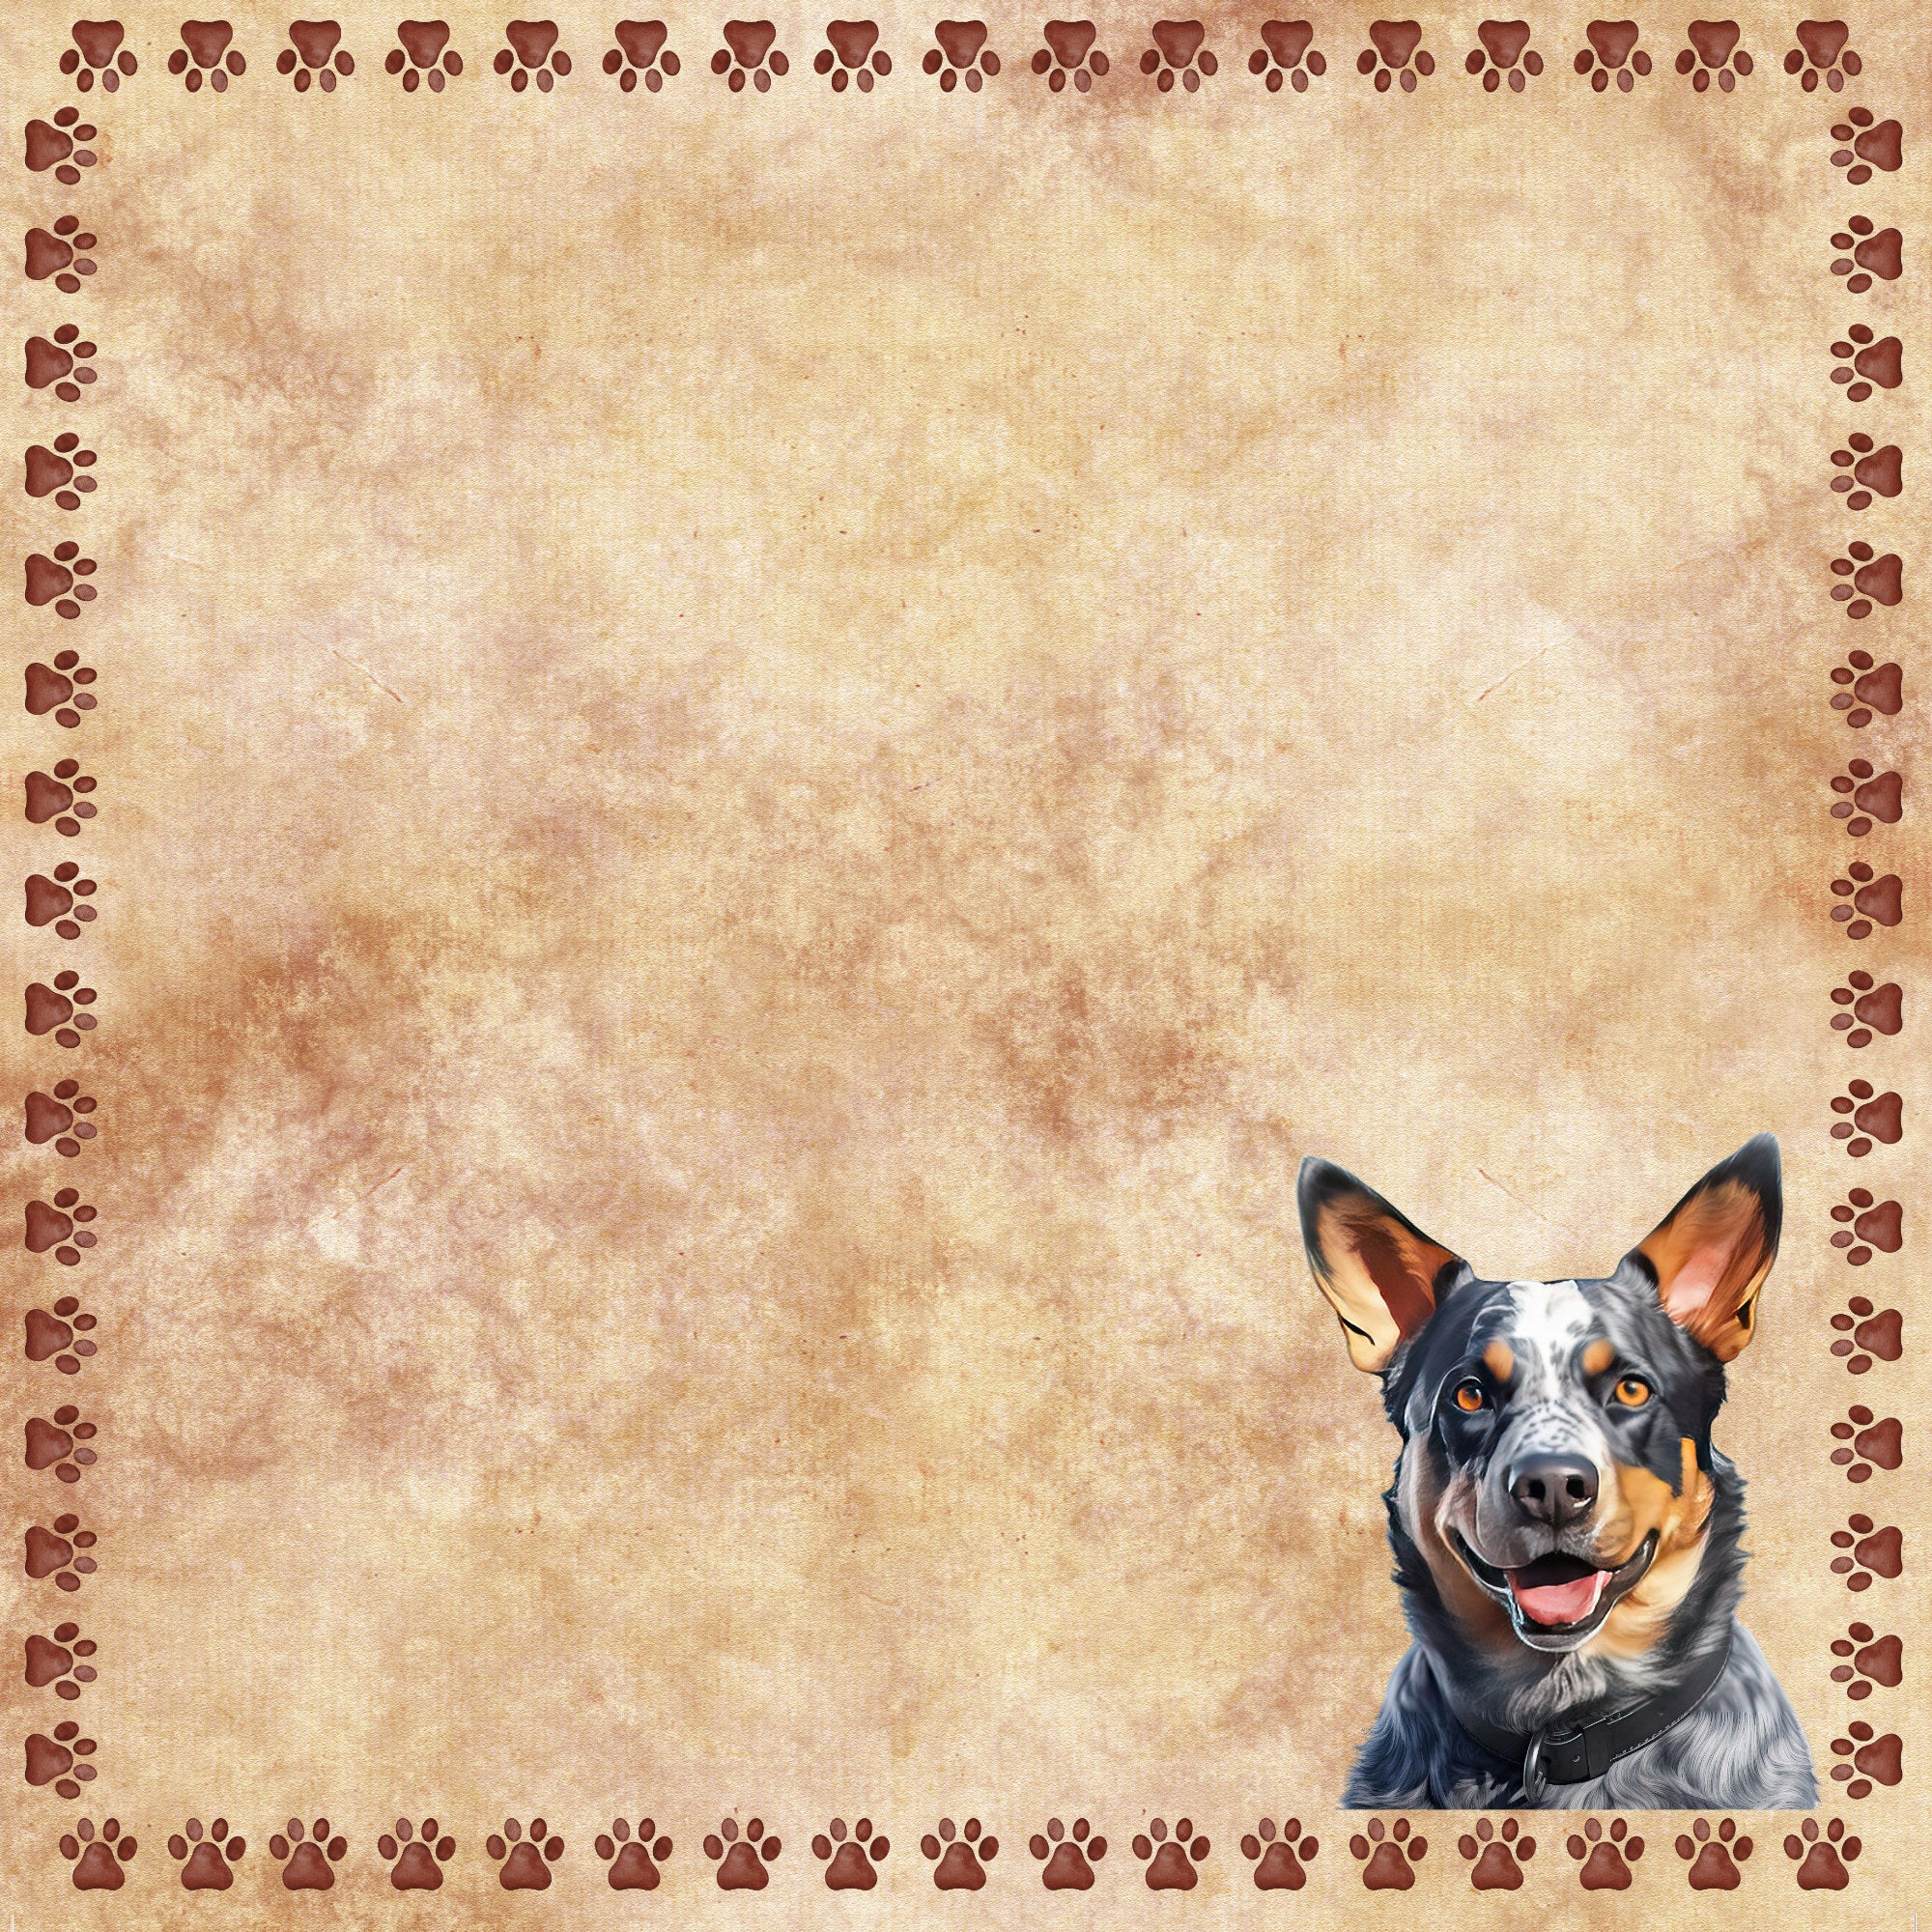 Dog Breeds Collection Australian Cattle Dog 12 x 12 Double-Sided Scrapbook Paper by SSC Designs